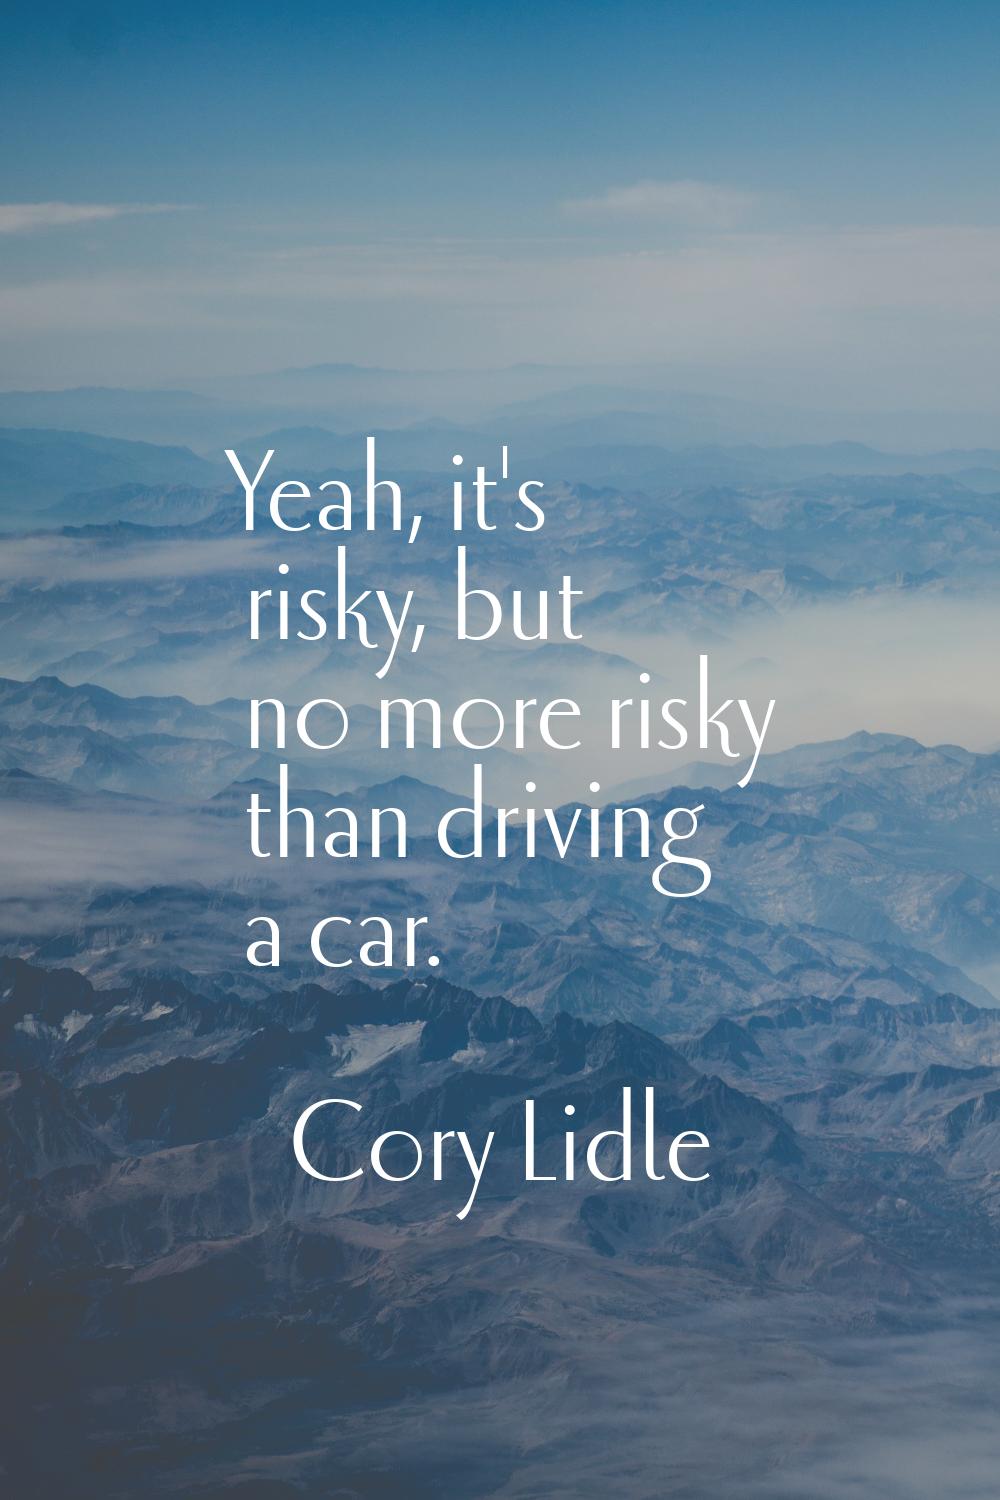 Yeah, it's risky, but no more risky than driving a car.